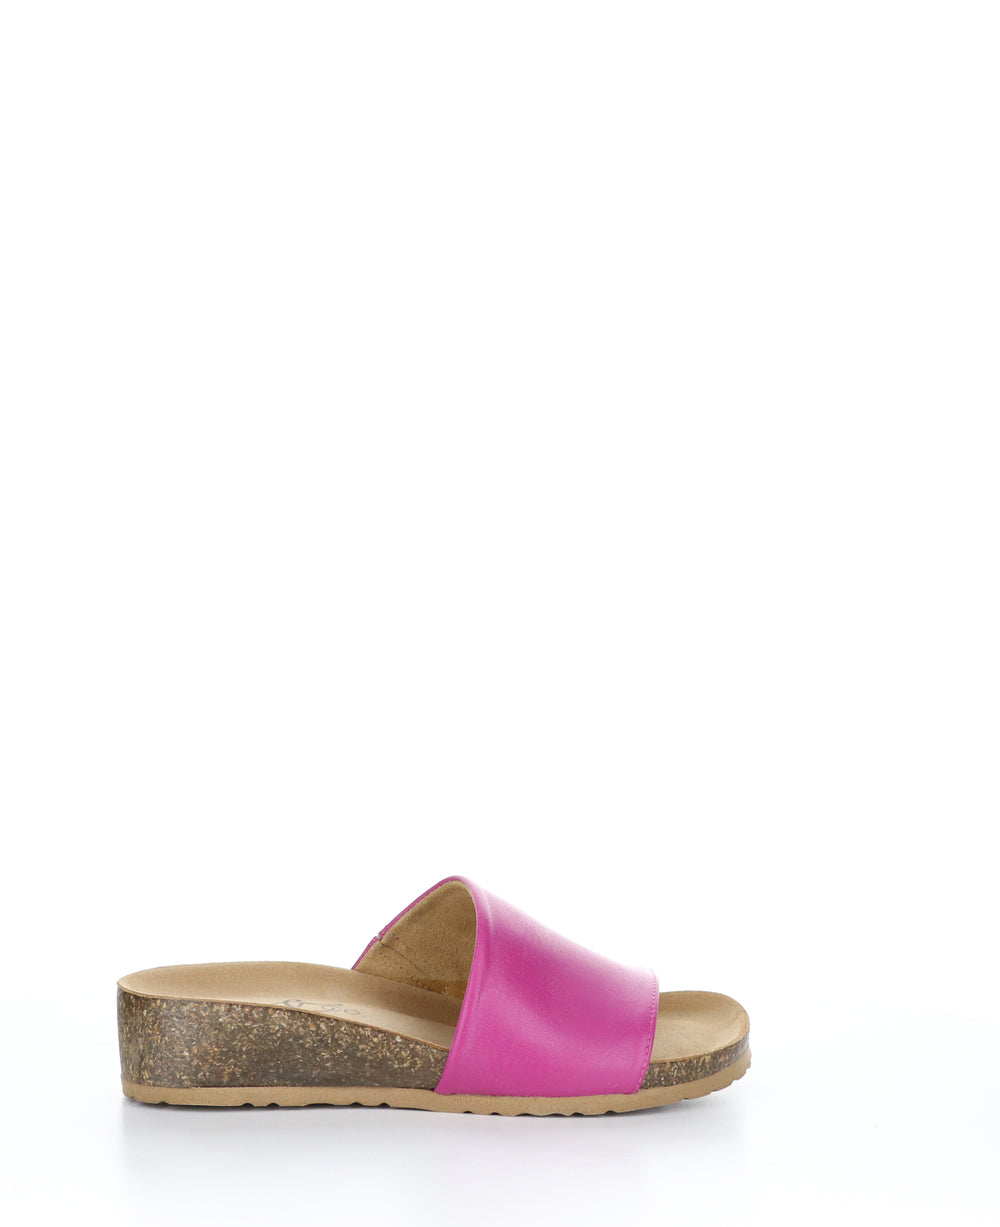 LUX ORCHID Wedge Mules|LUX Mules à Bout Ouvert in Rose